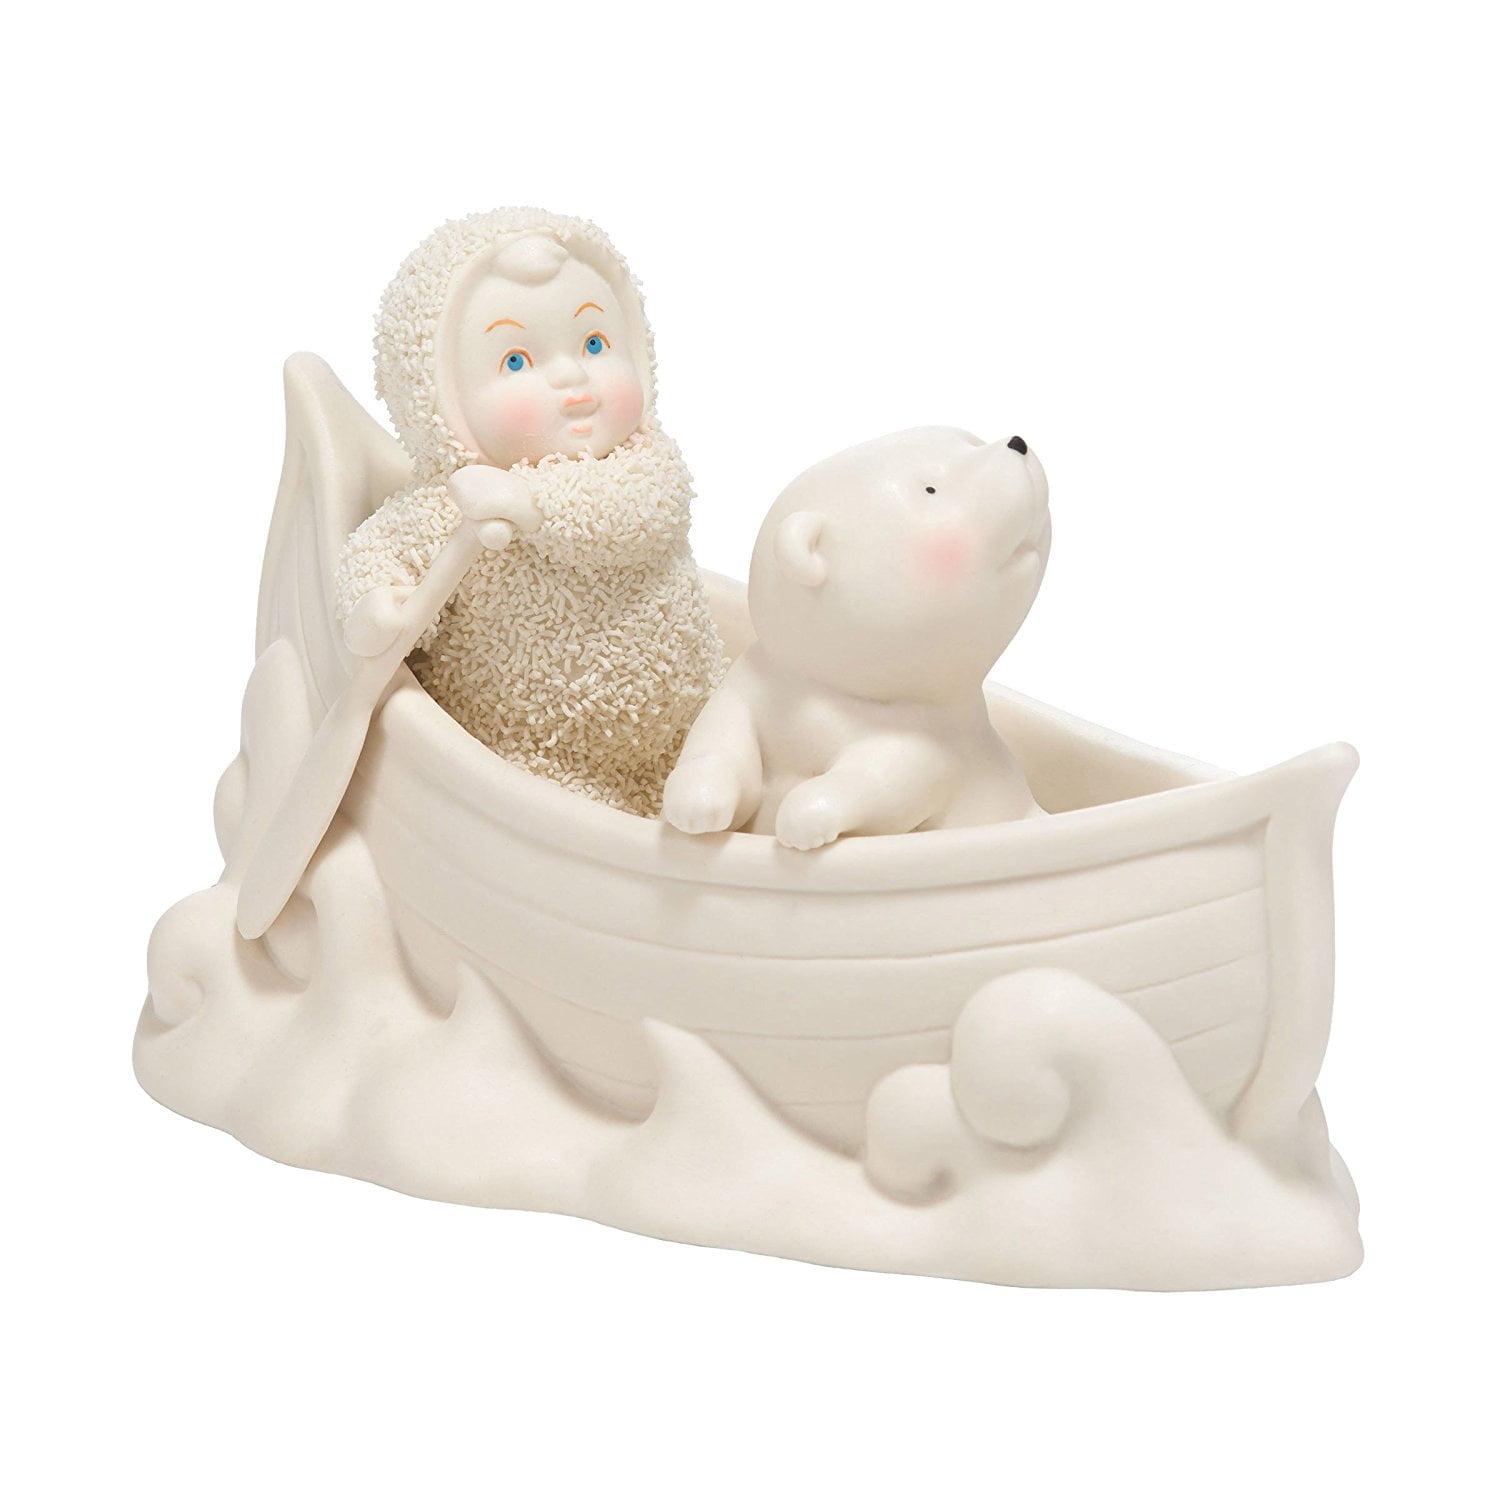 Set of 2 4 inch Department 56 Snowbabies Classics Baby Blossoms Figurine